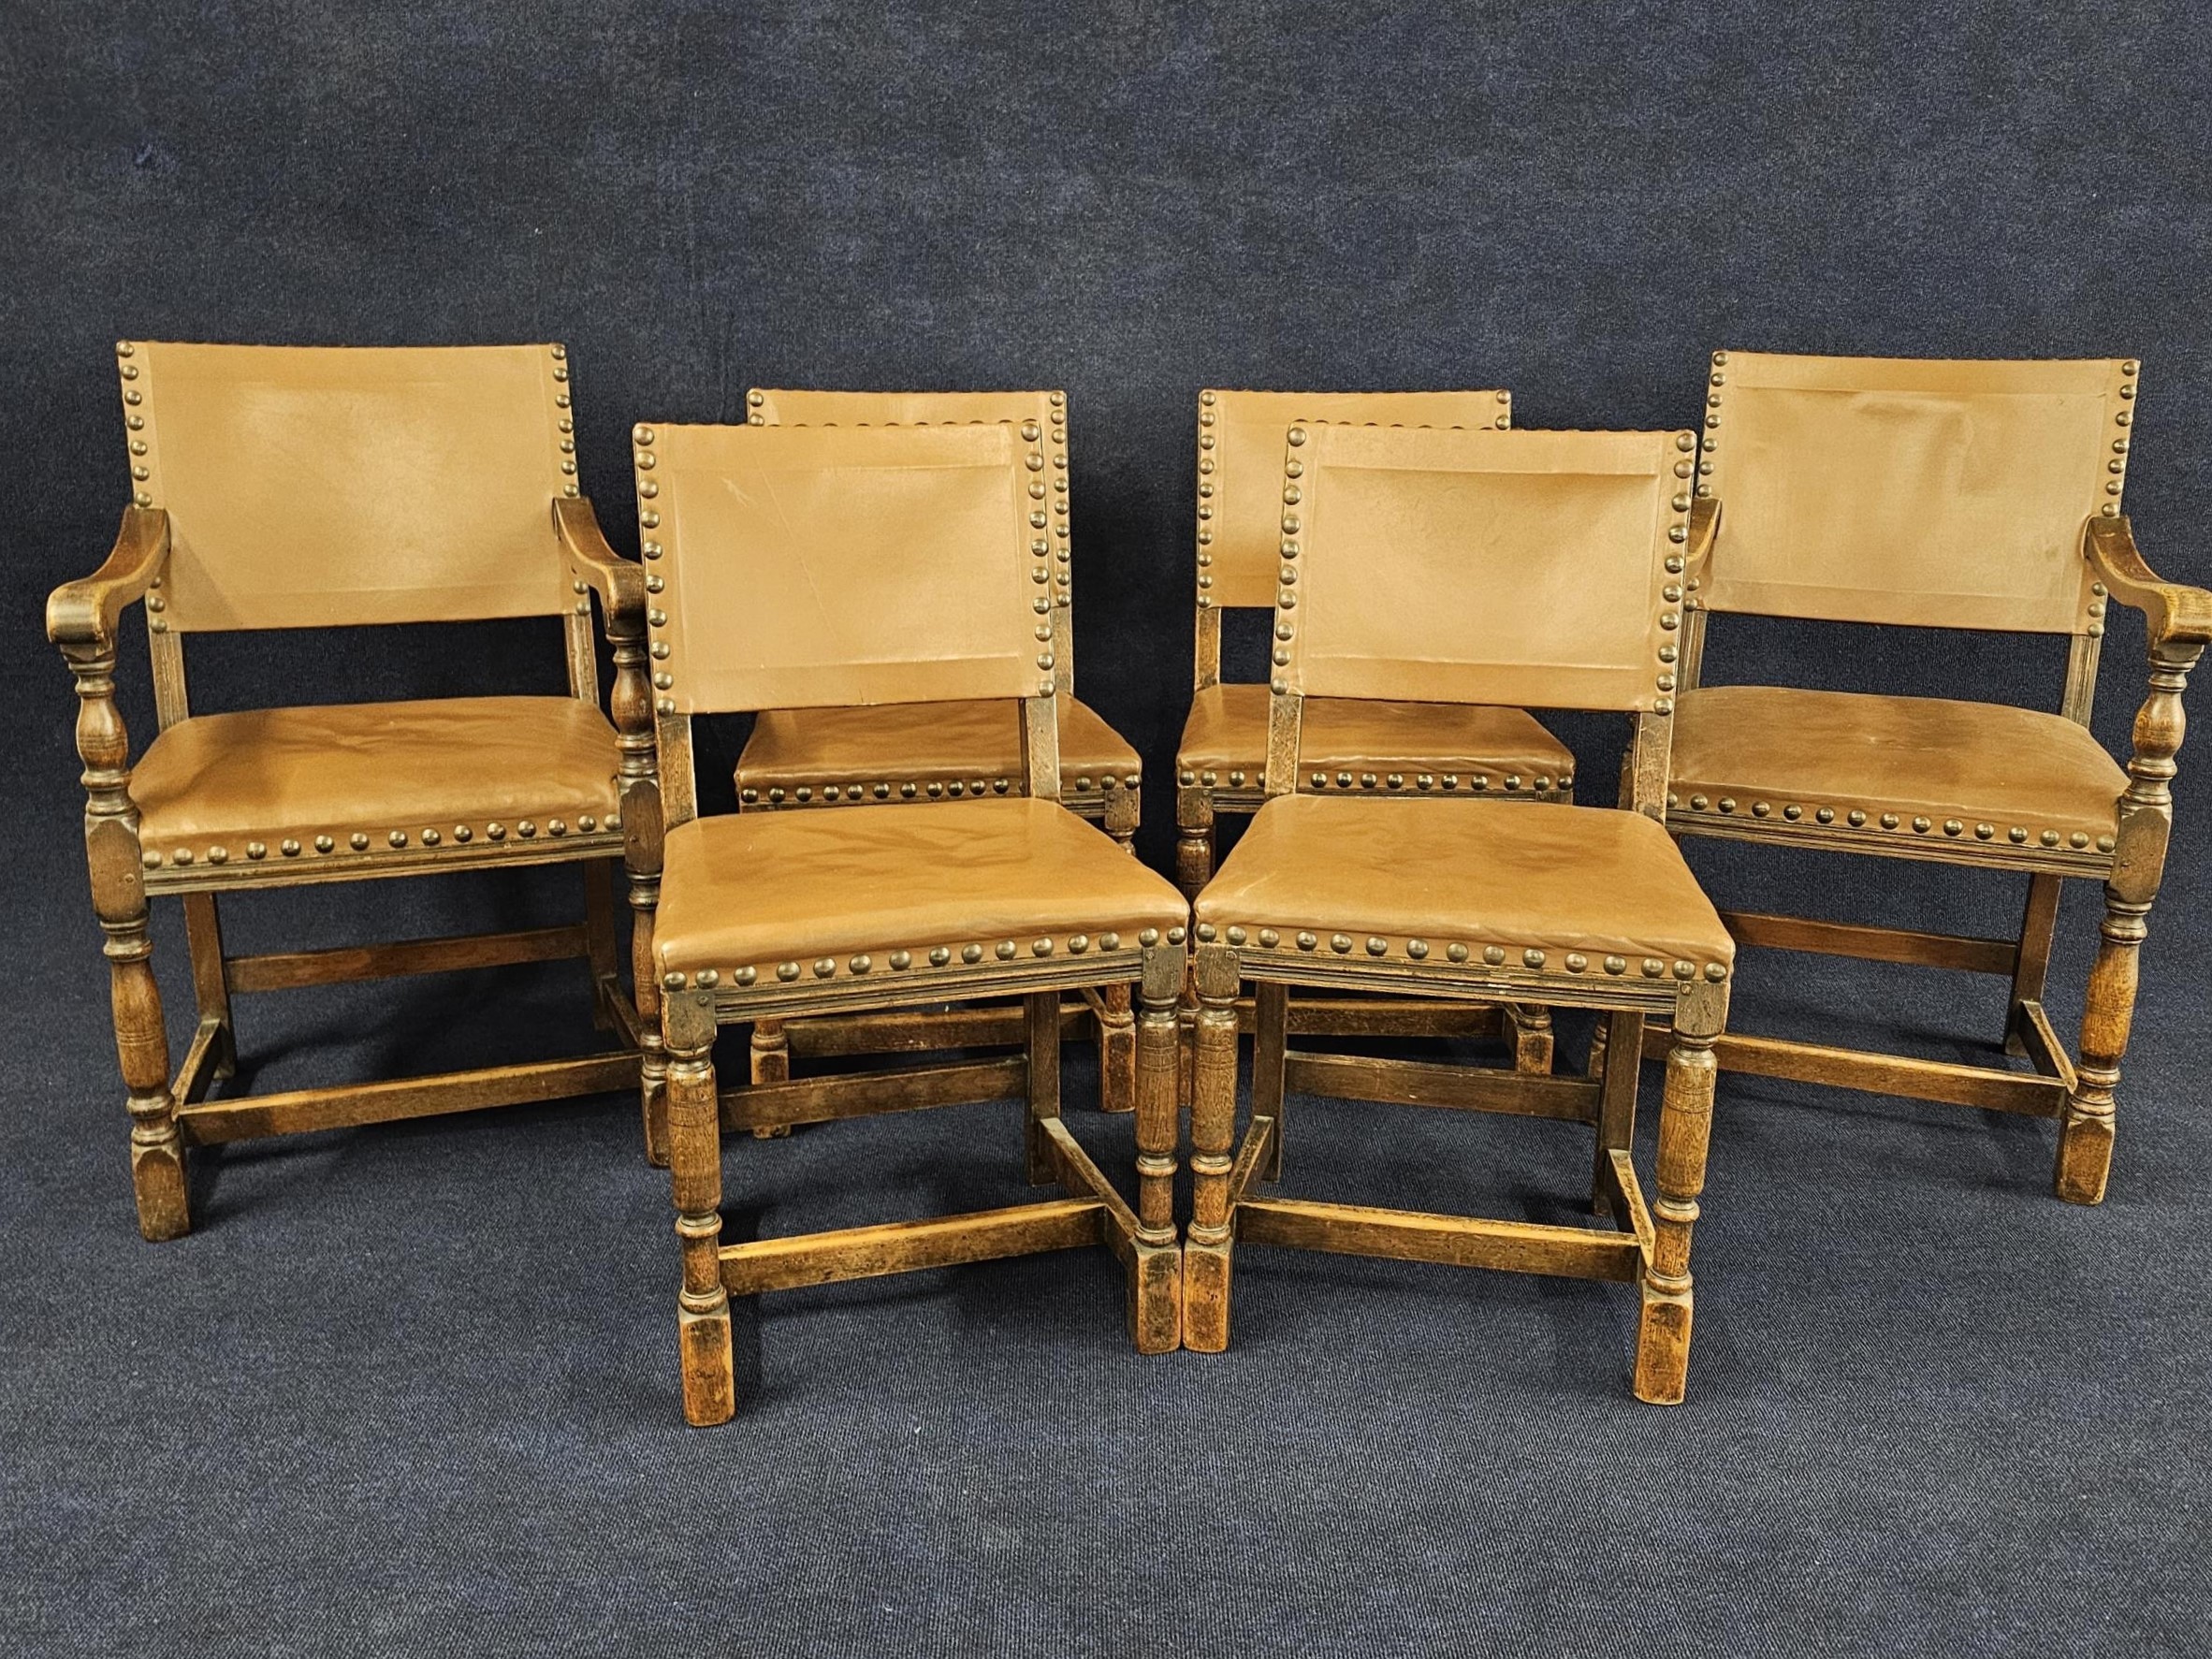 A set of six mid century oak framed dining chairs in the Jacobean style. Upholstered in leather to